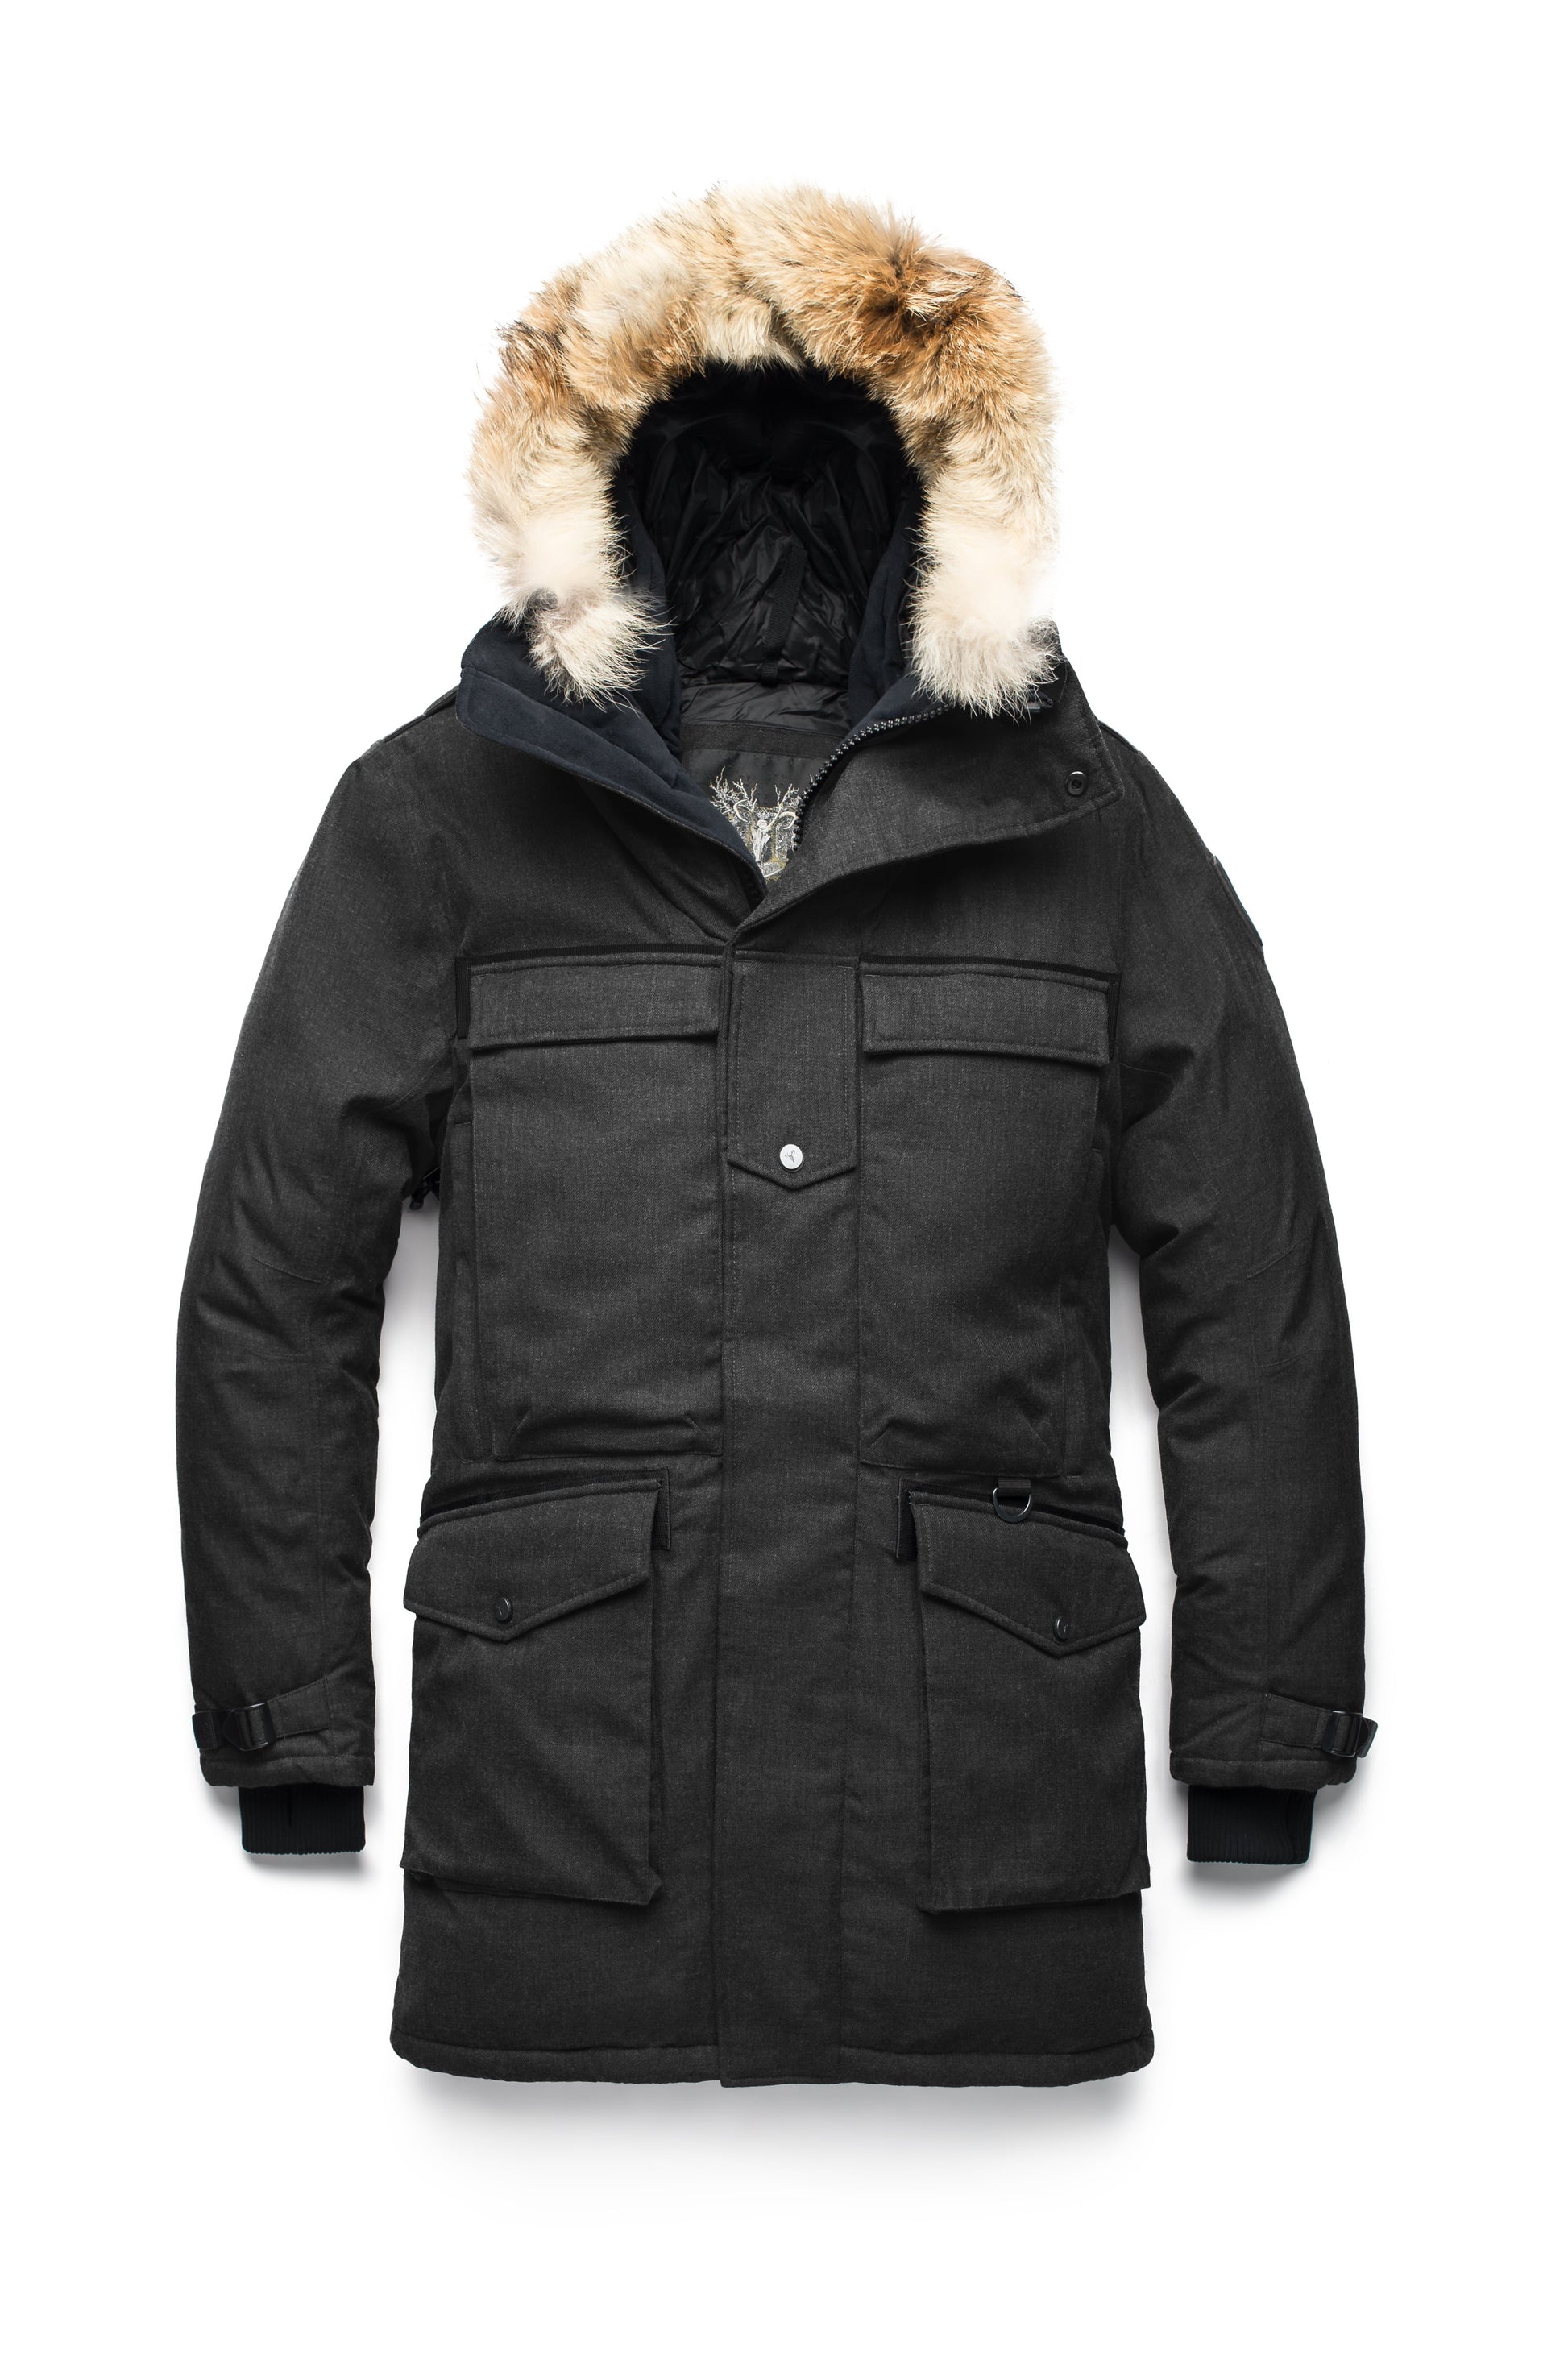 Men's extreme wamrth down filled parka with baffle box construction for even down distribution in H. Black